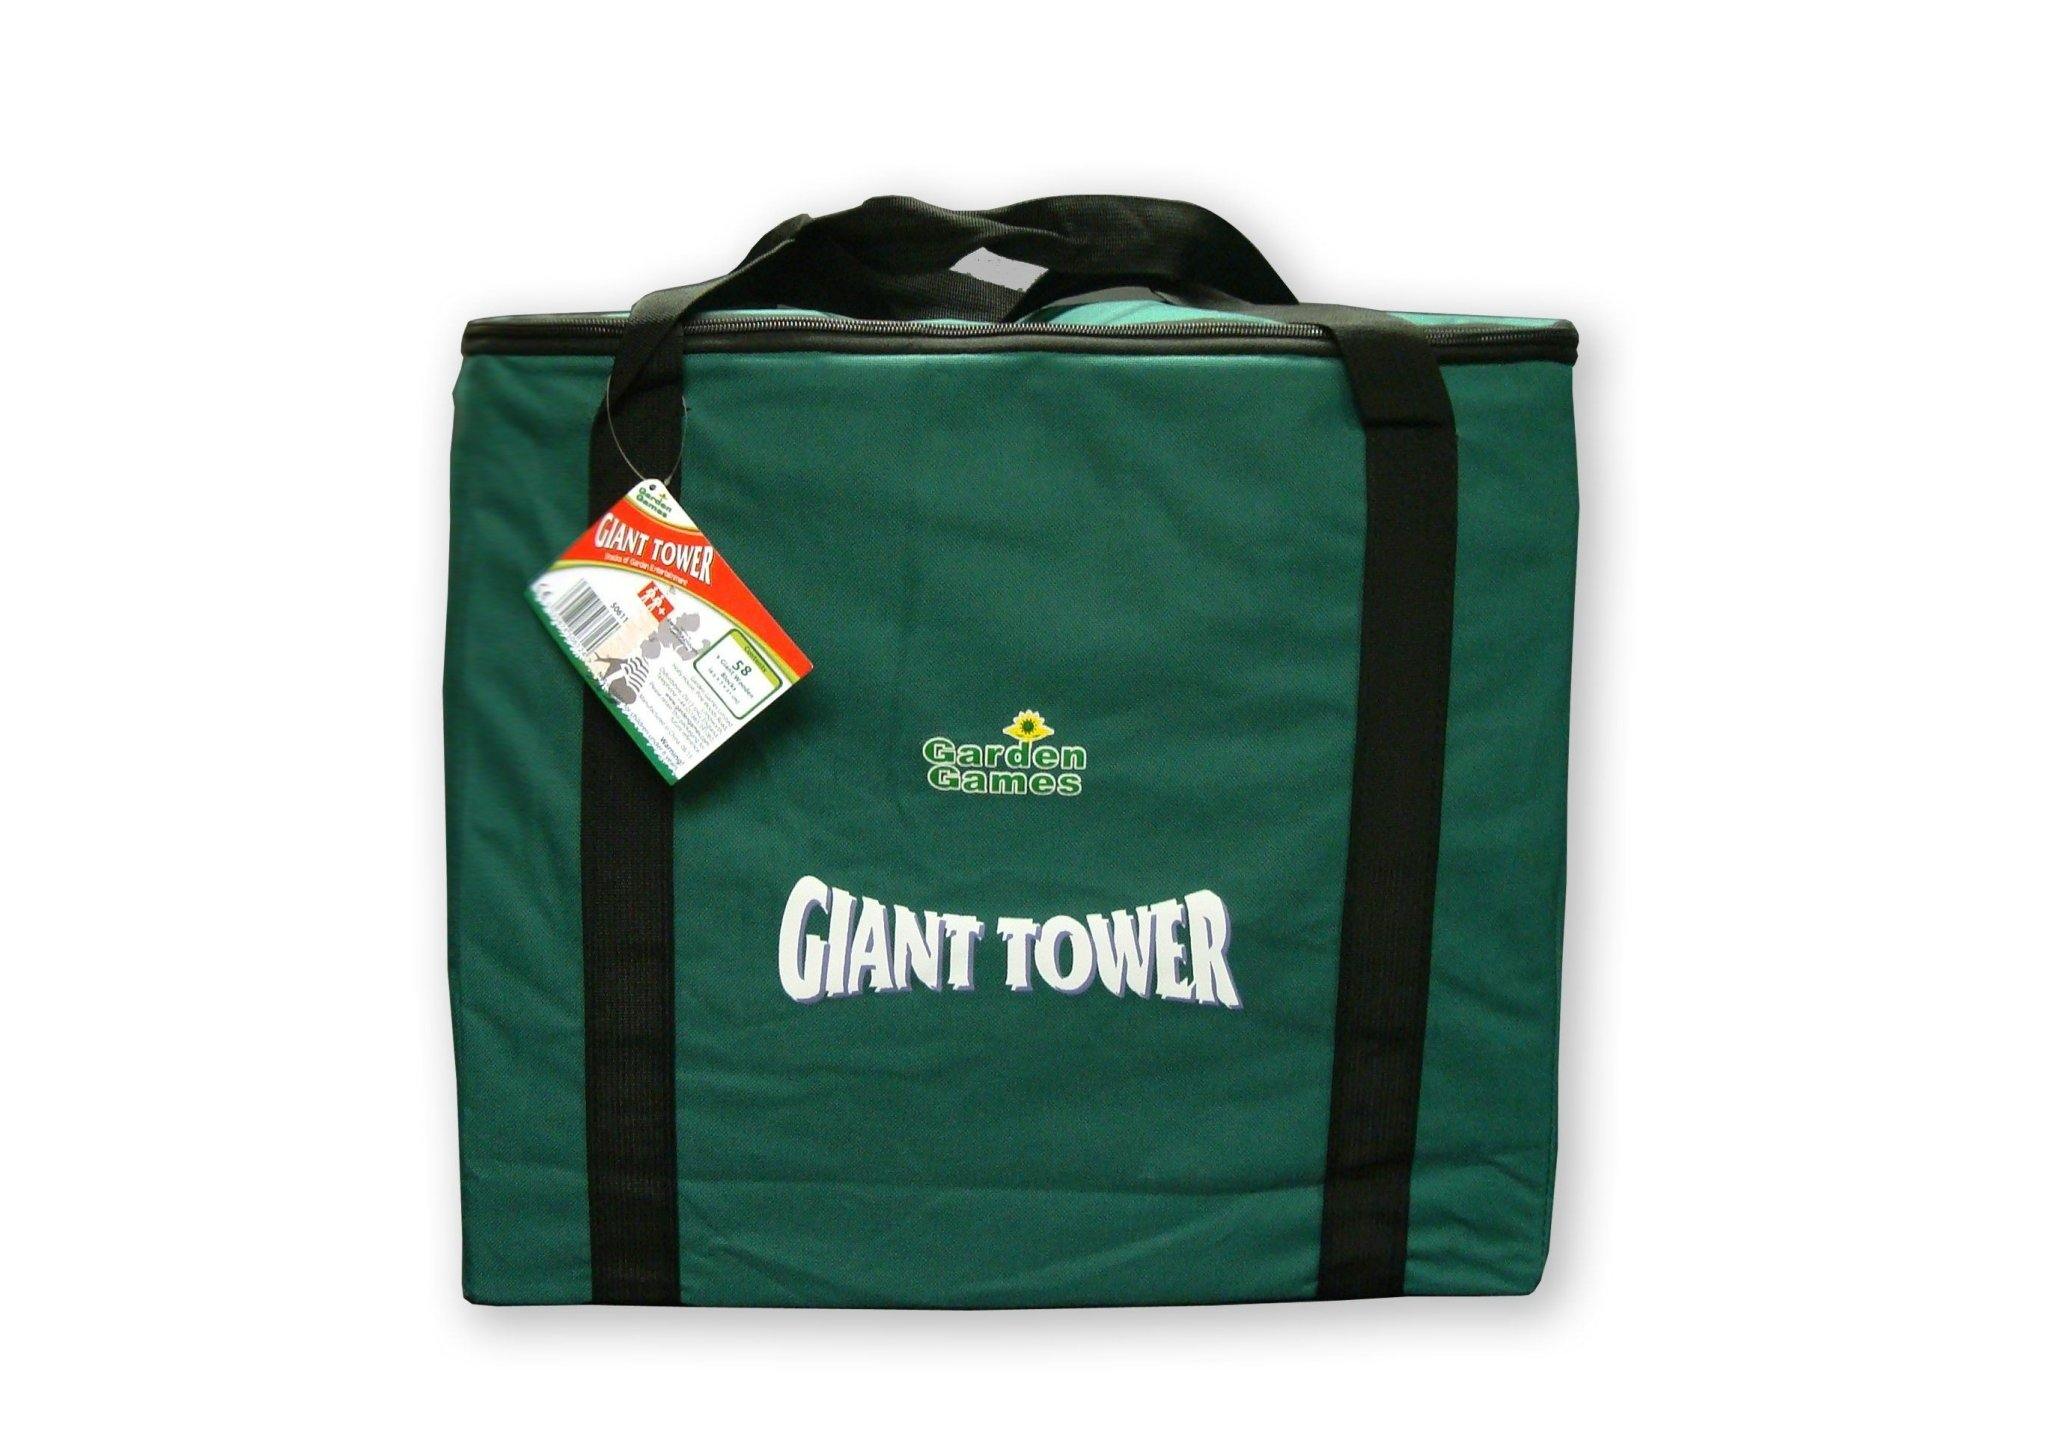 Giant Tower with Carrying/Storage Bag - Dti Direct USA